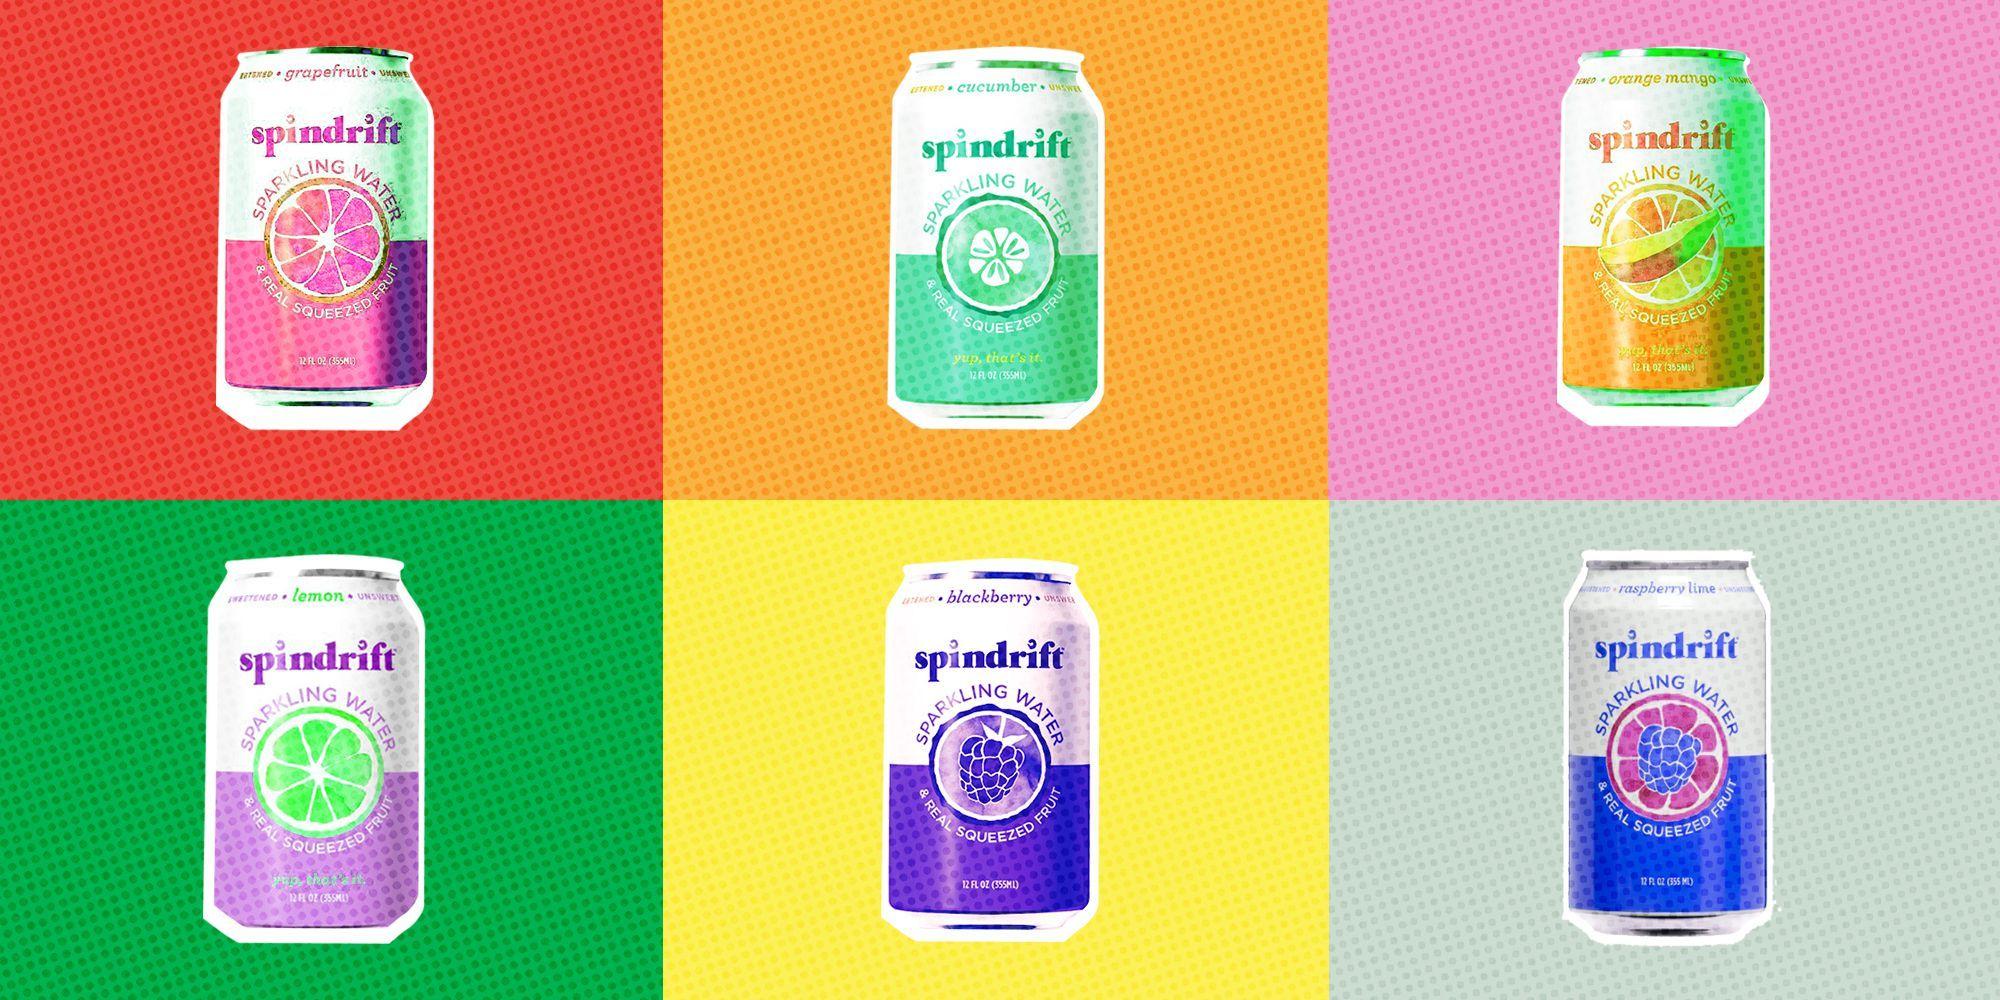 Spindrift Logo - What's the Best Seltzer? - If You Are a Trendy Baby, You Love ...